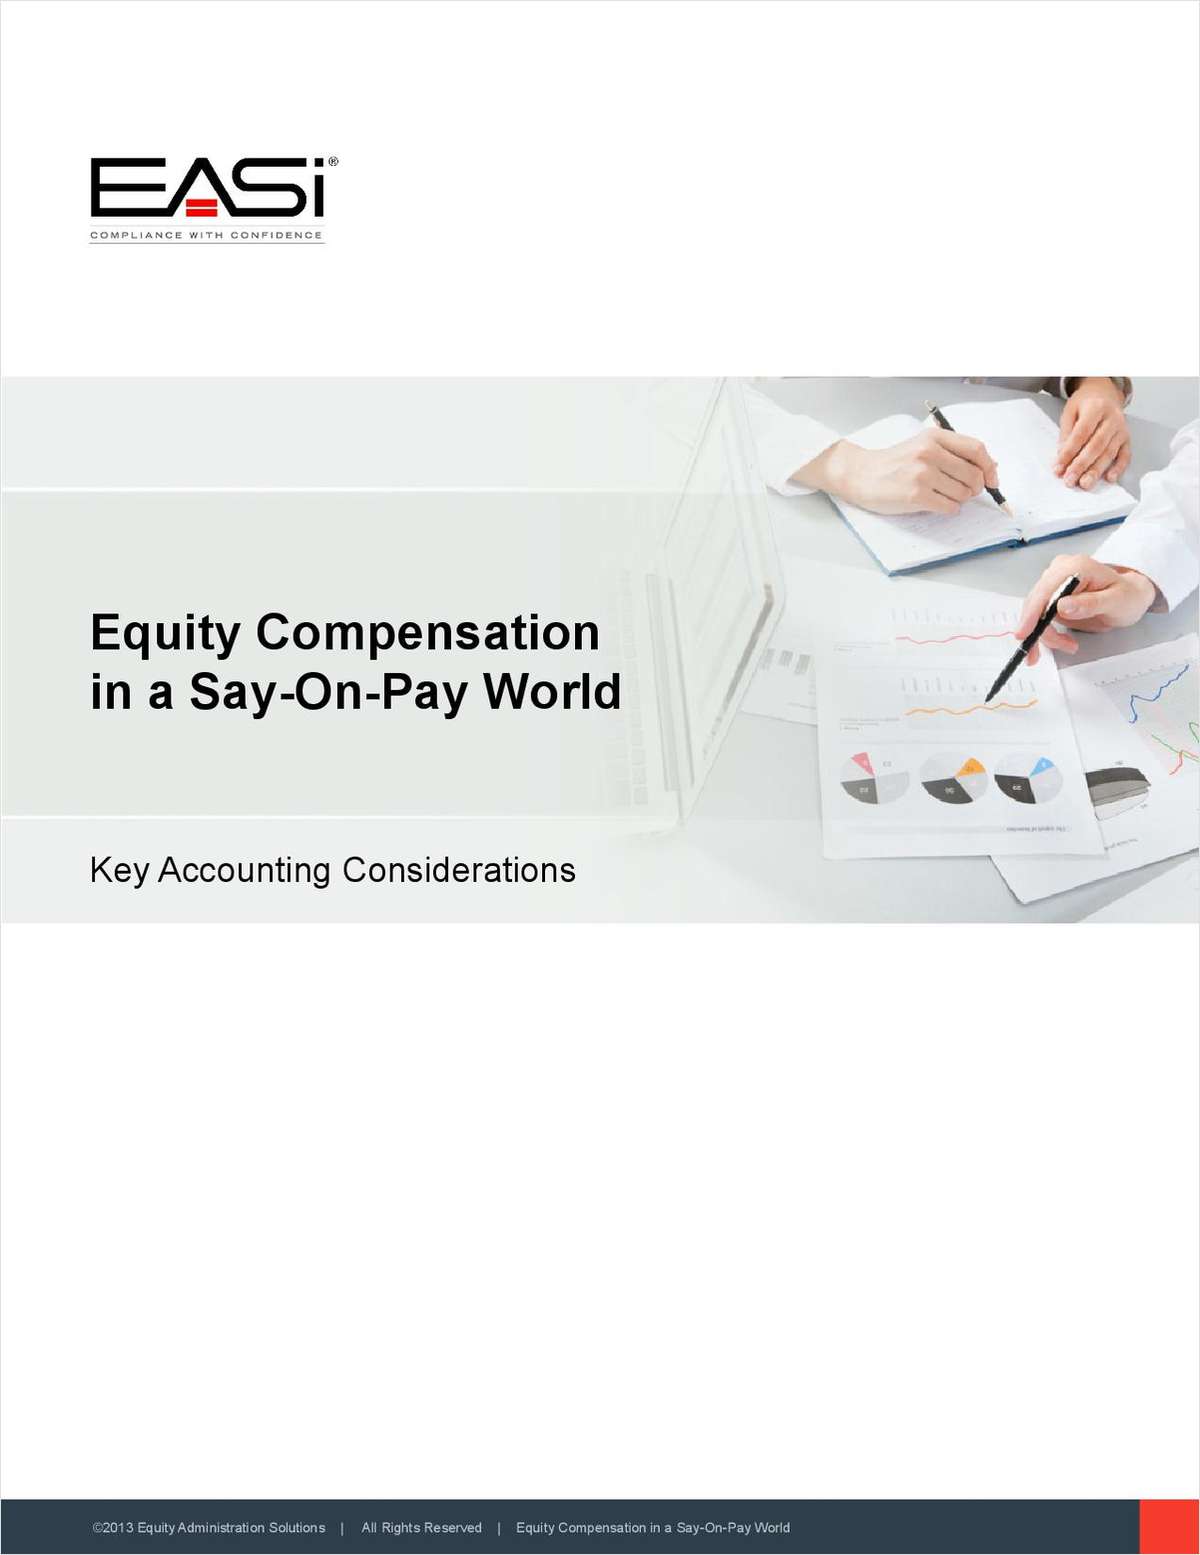 Equity Compensation in a Say-On-Pay World